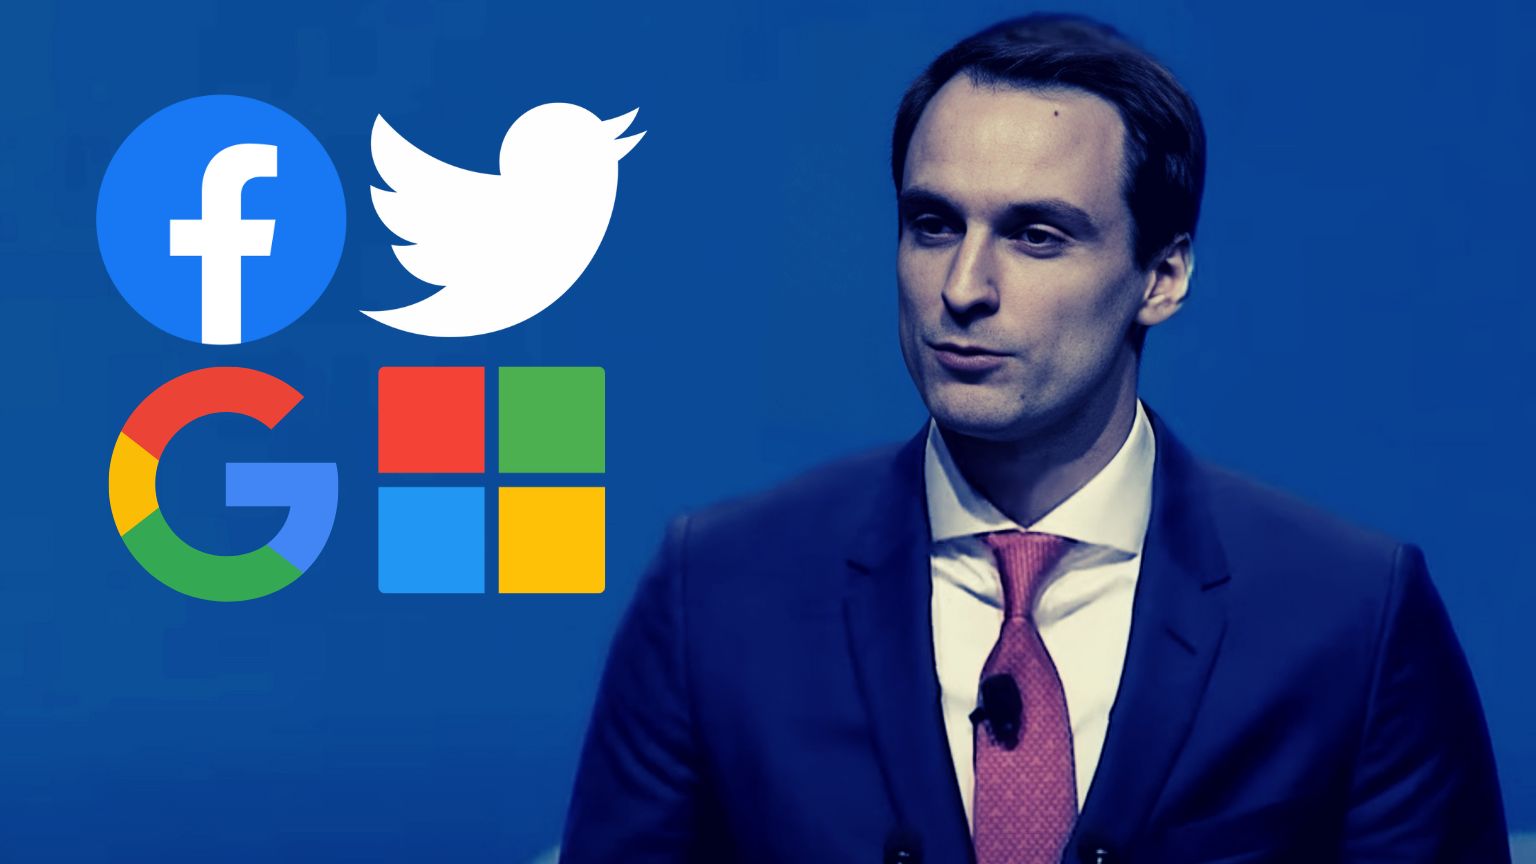 Trump tech advisor reportedly urged Twitter, Facebook, Google, and Microsoft to “combat misinformation”